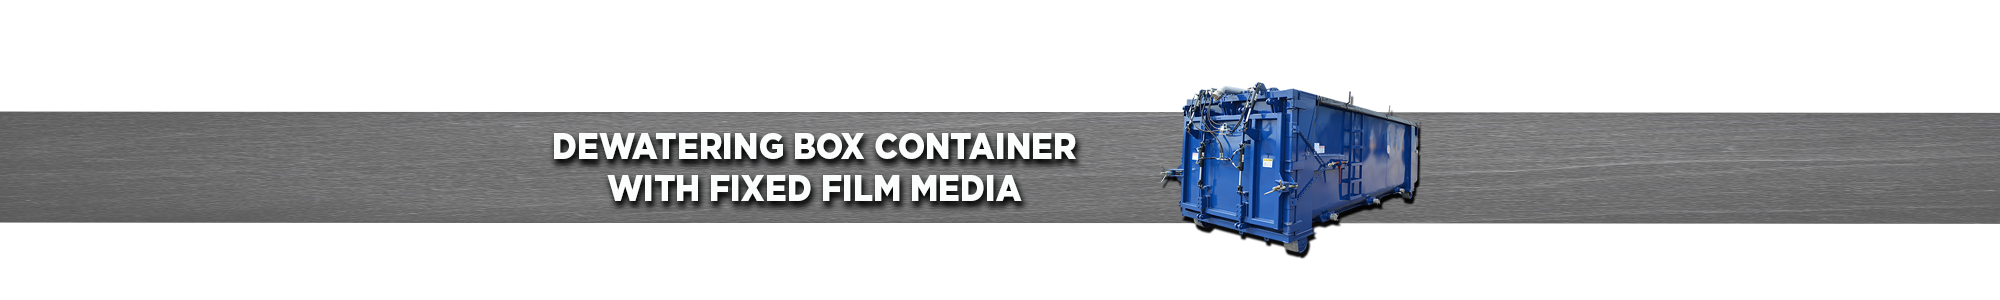 Dewatering Box Container with Fixed Film Media